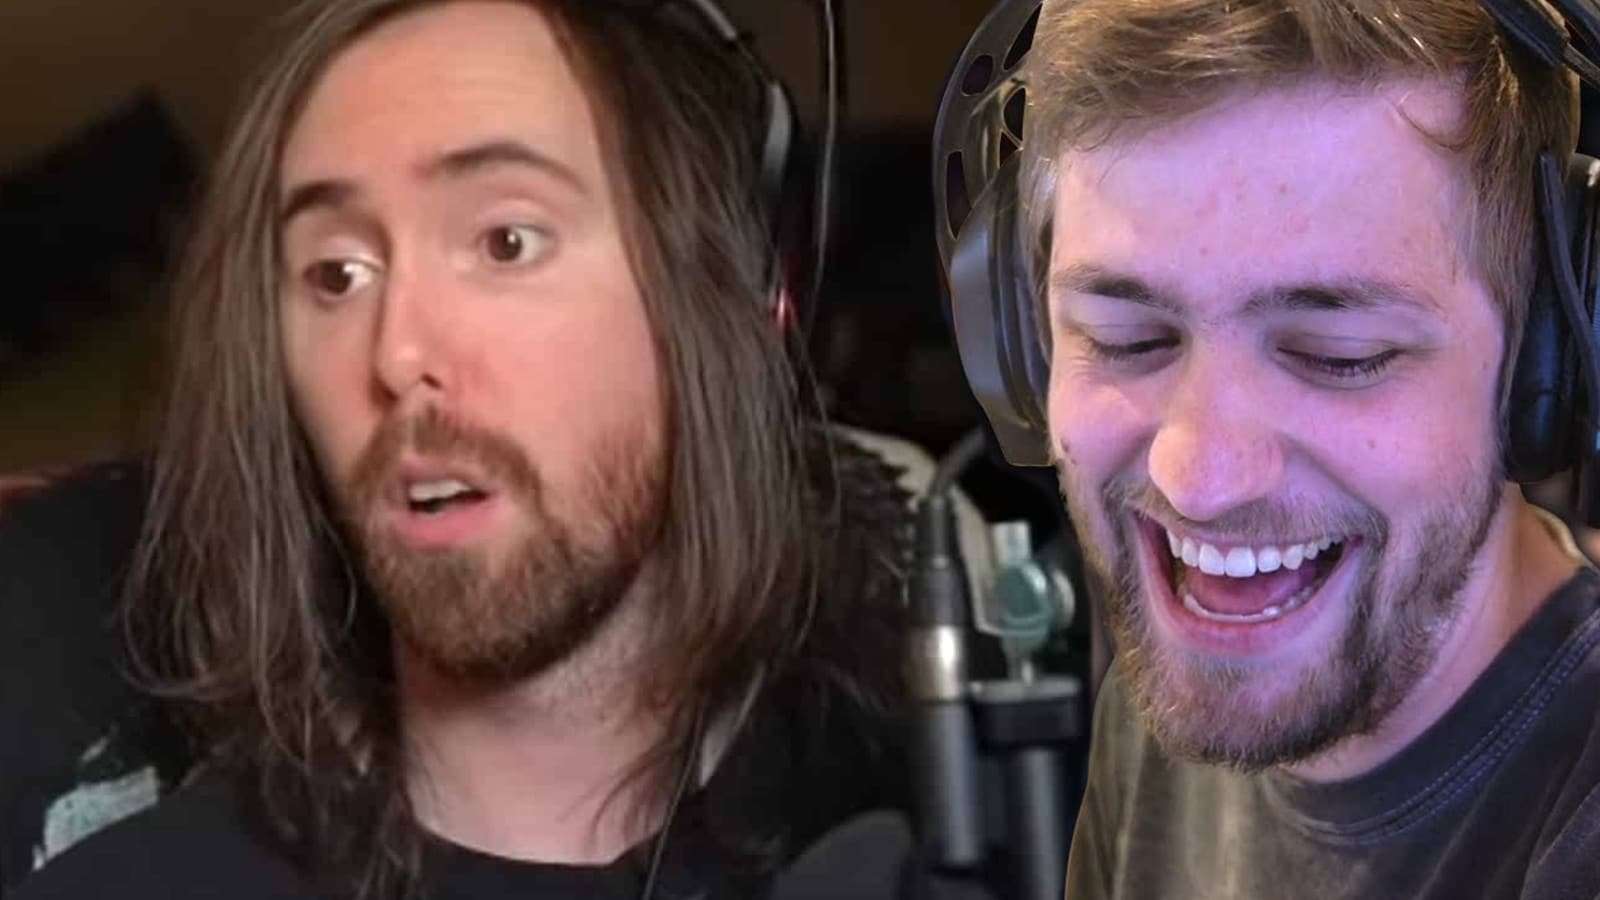 Asmongold looking shocked with Sodapoppin laughing while streaming on Twitch